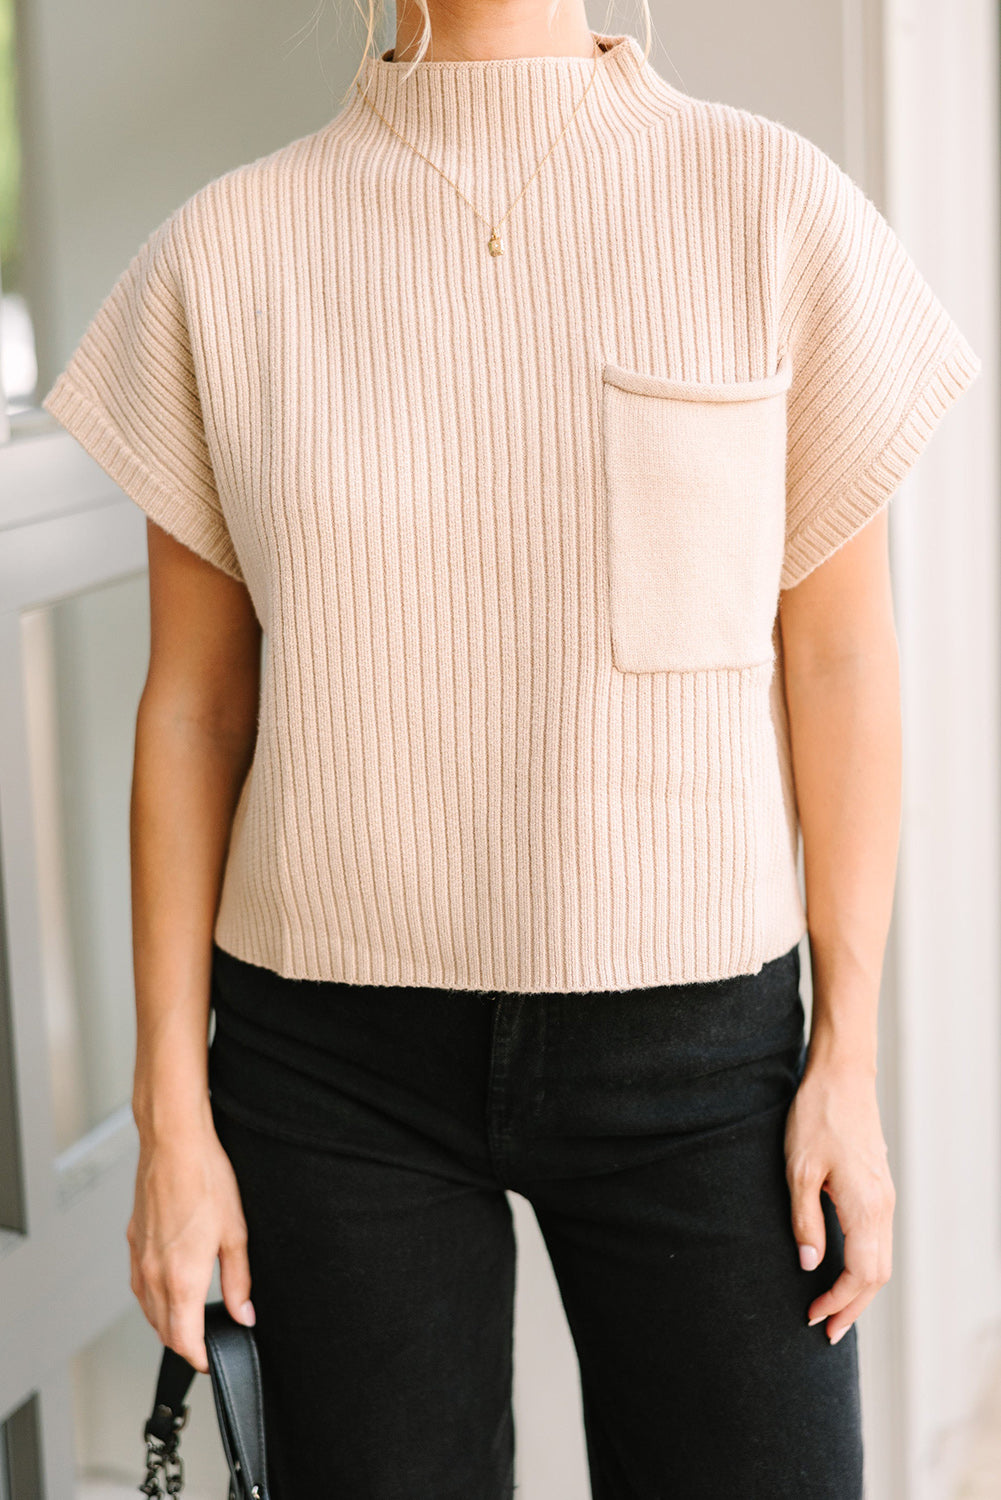 Oatmeal Patch Pocket Ribbed Knit Short Sleeve Sweater Pre Order Sweaters & Cardigans JT's Designer Fashion